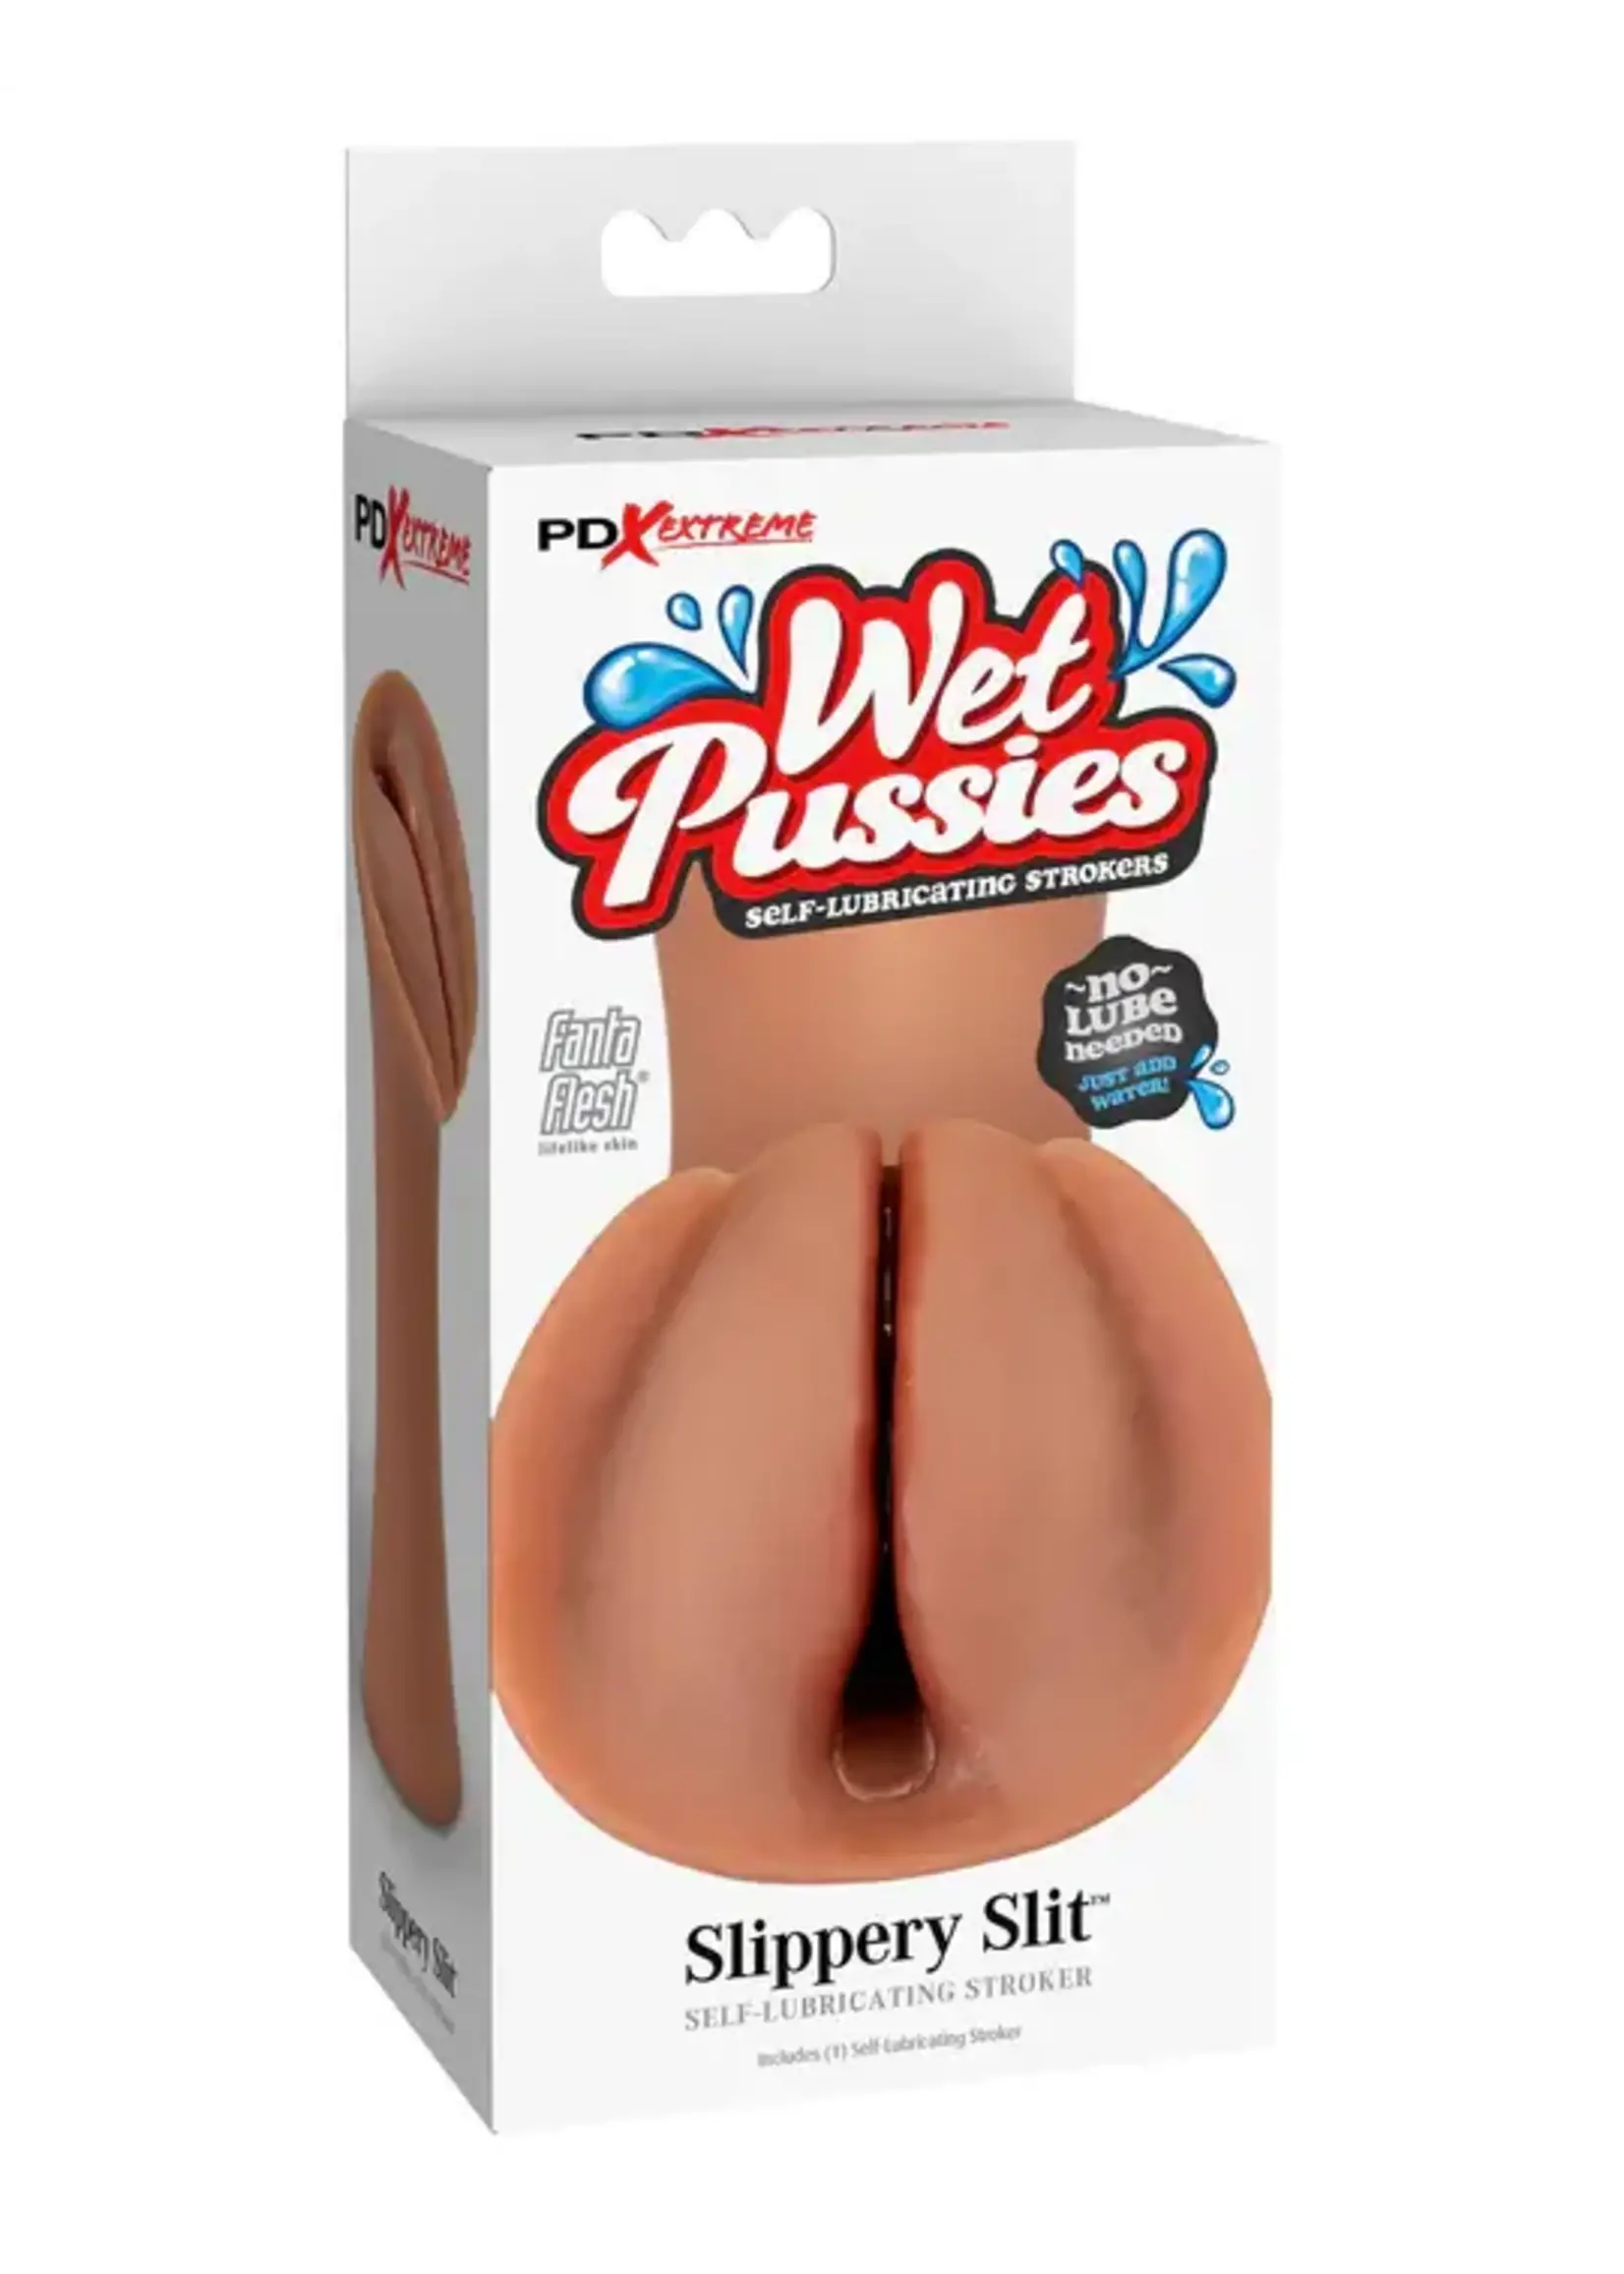 PDX Extreme Wet Pussies - Slippery Slit